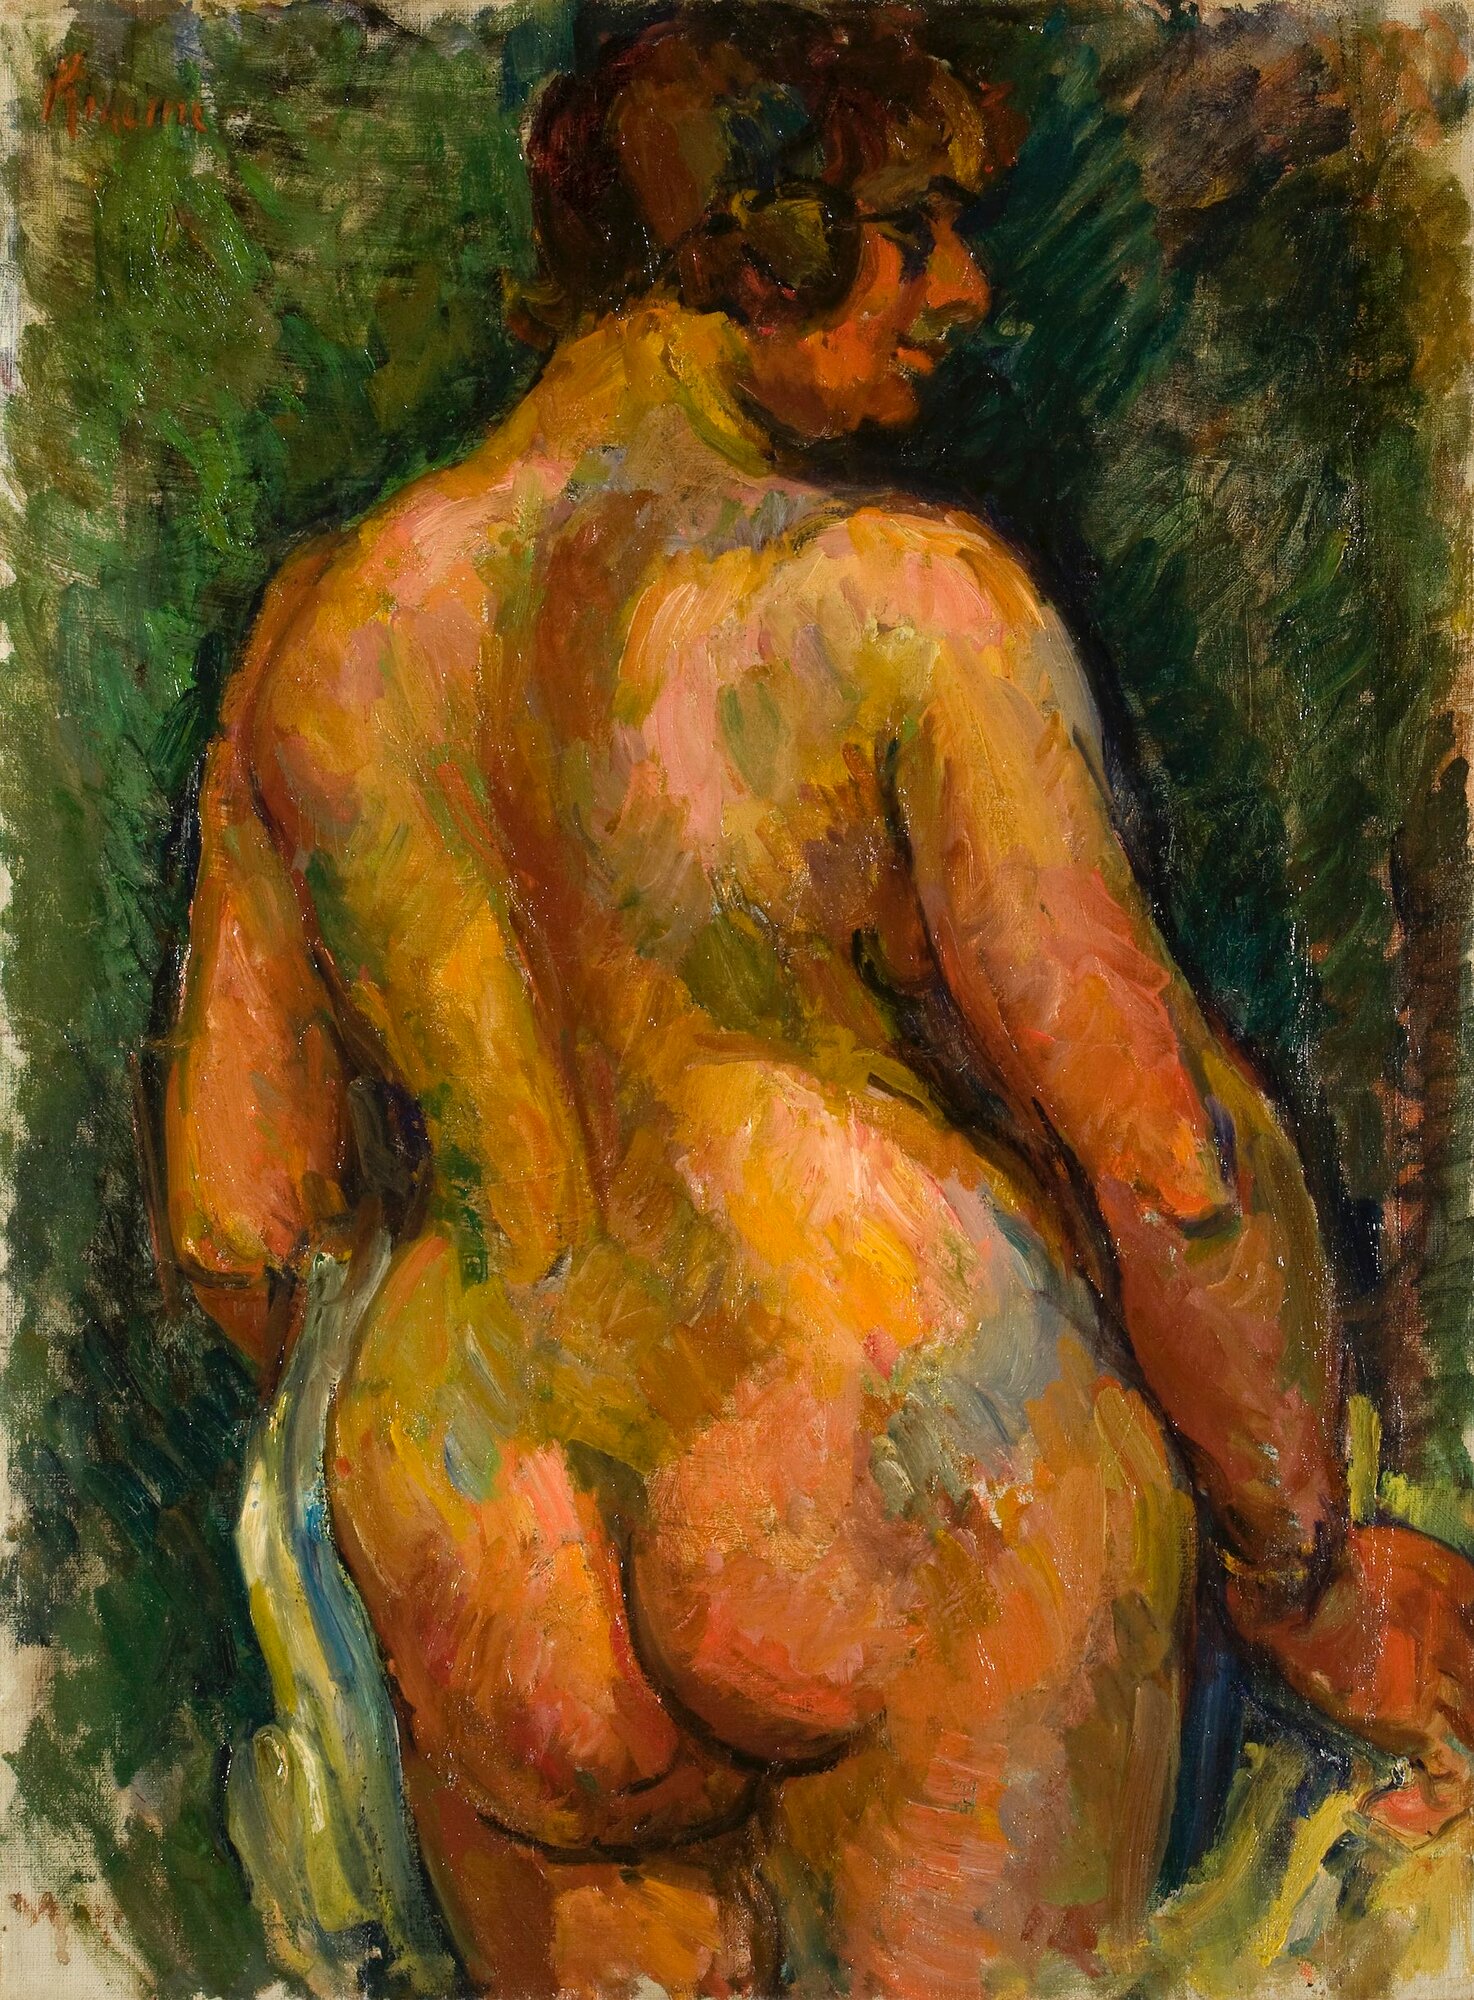 Standing Nude from the Back